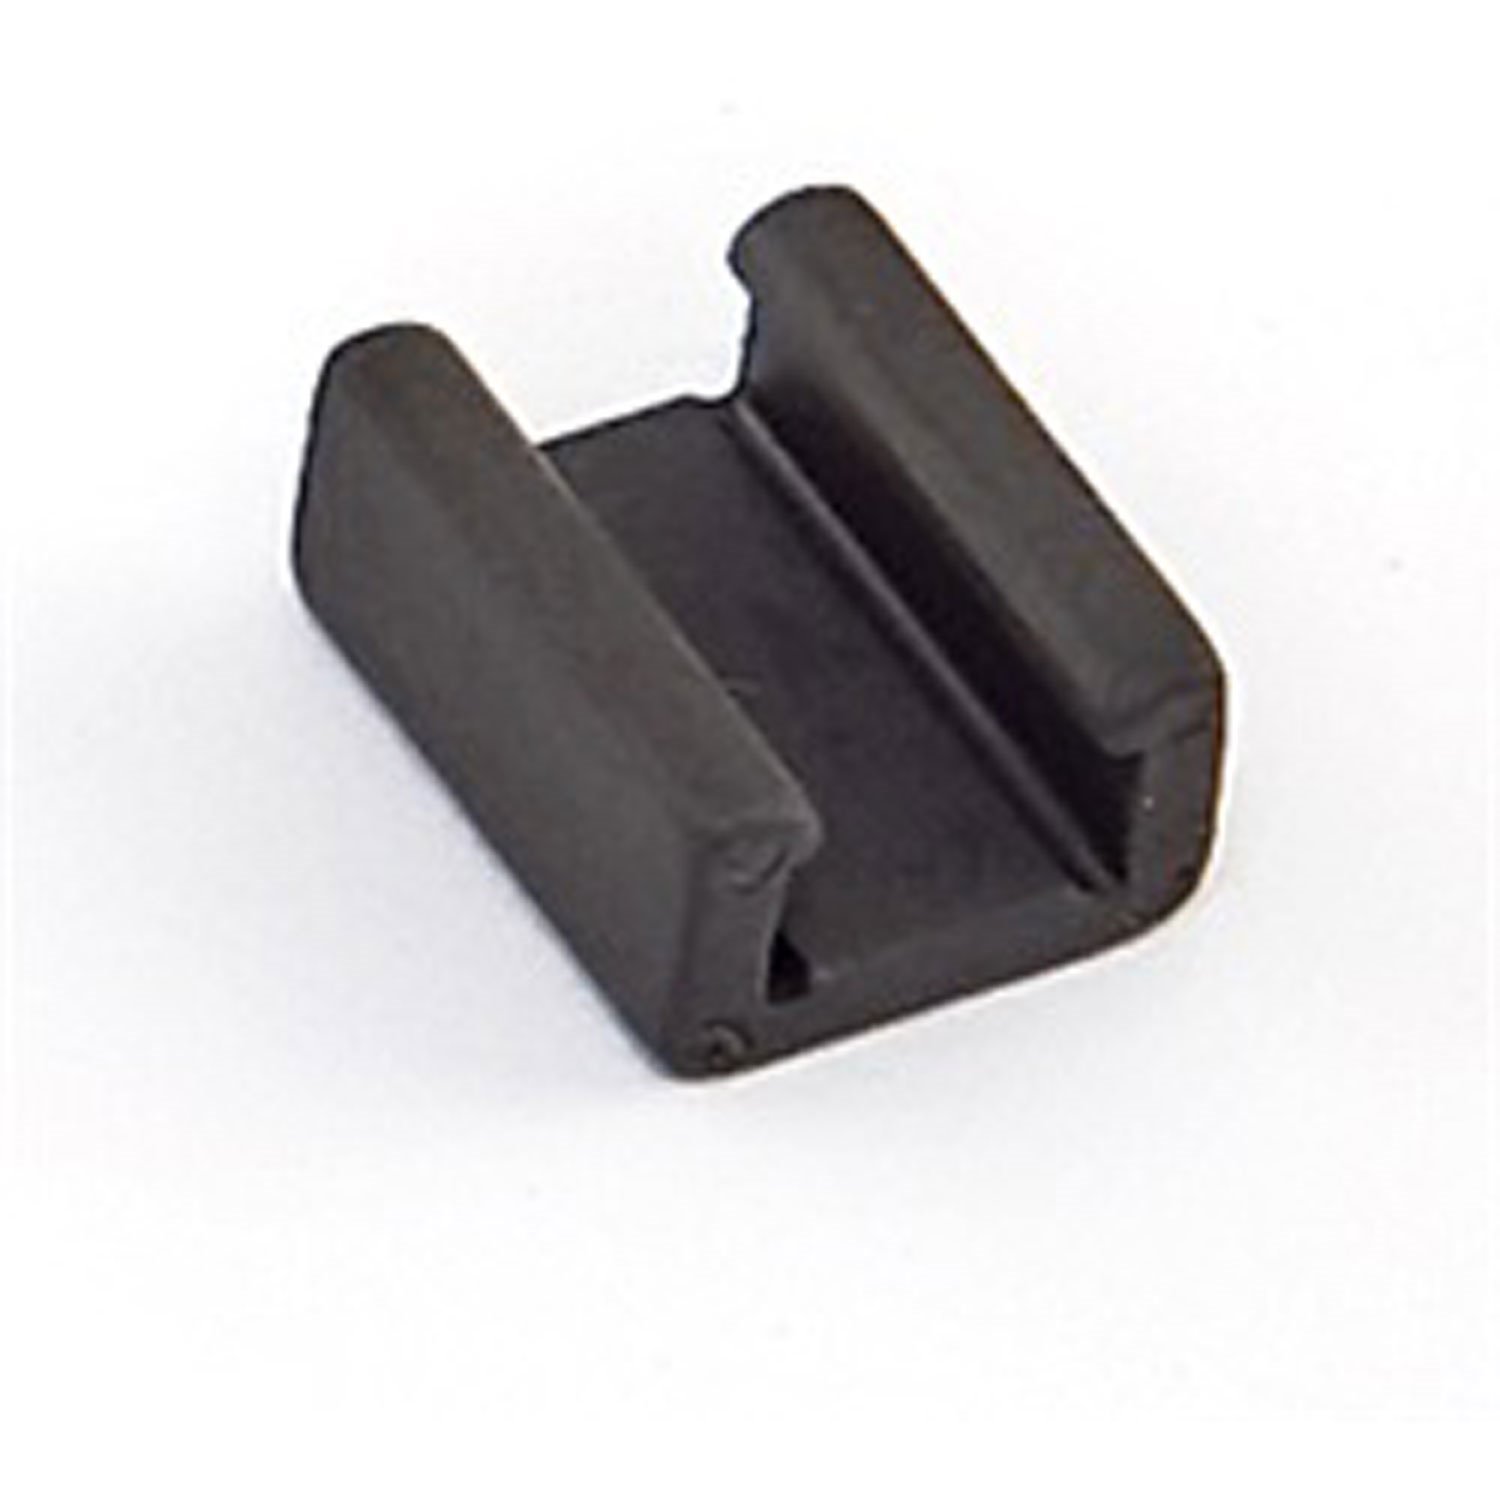 This axle disconnect shift fork insert from Omix-ADA fits 87-95 Jeep Wrangler YJ with Dana 30 front axle.